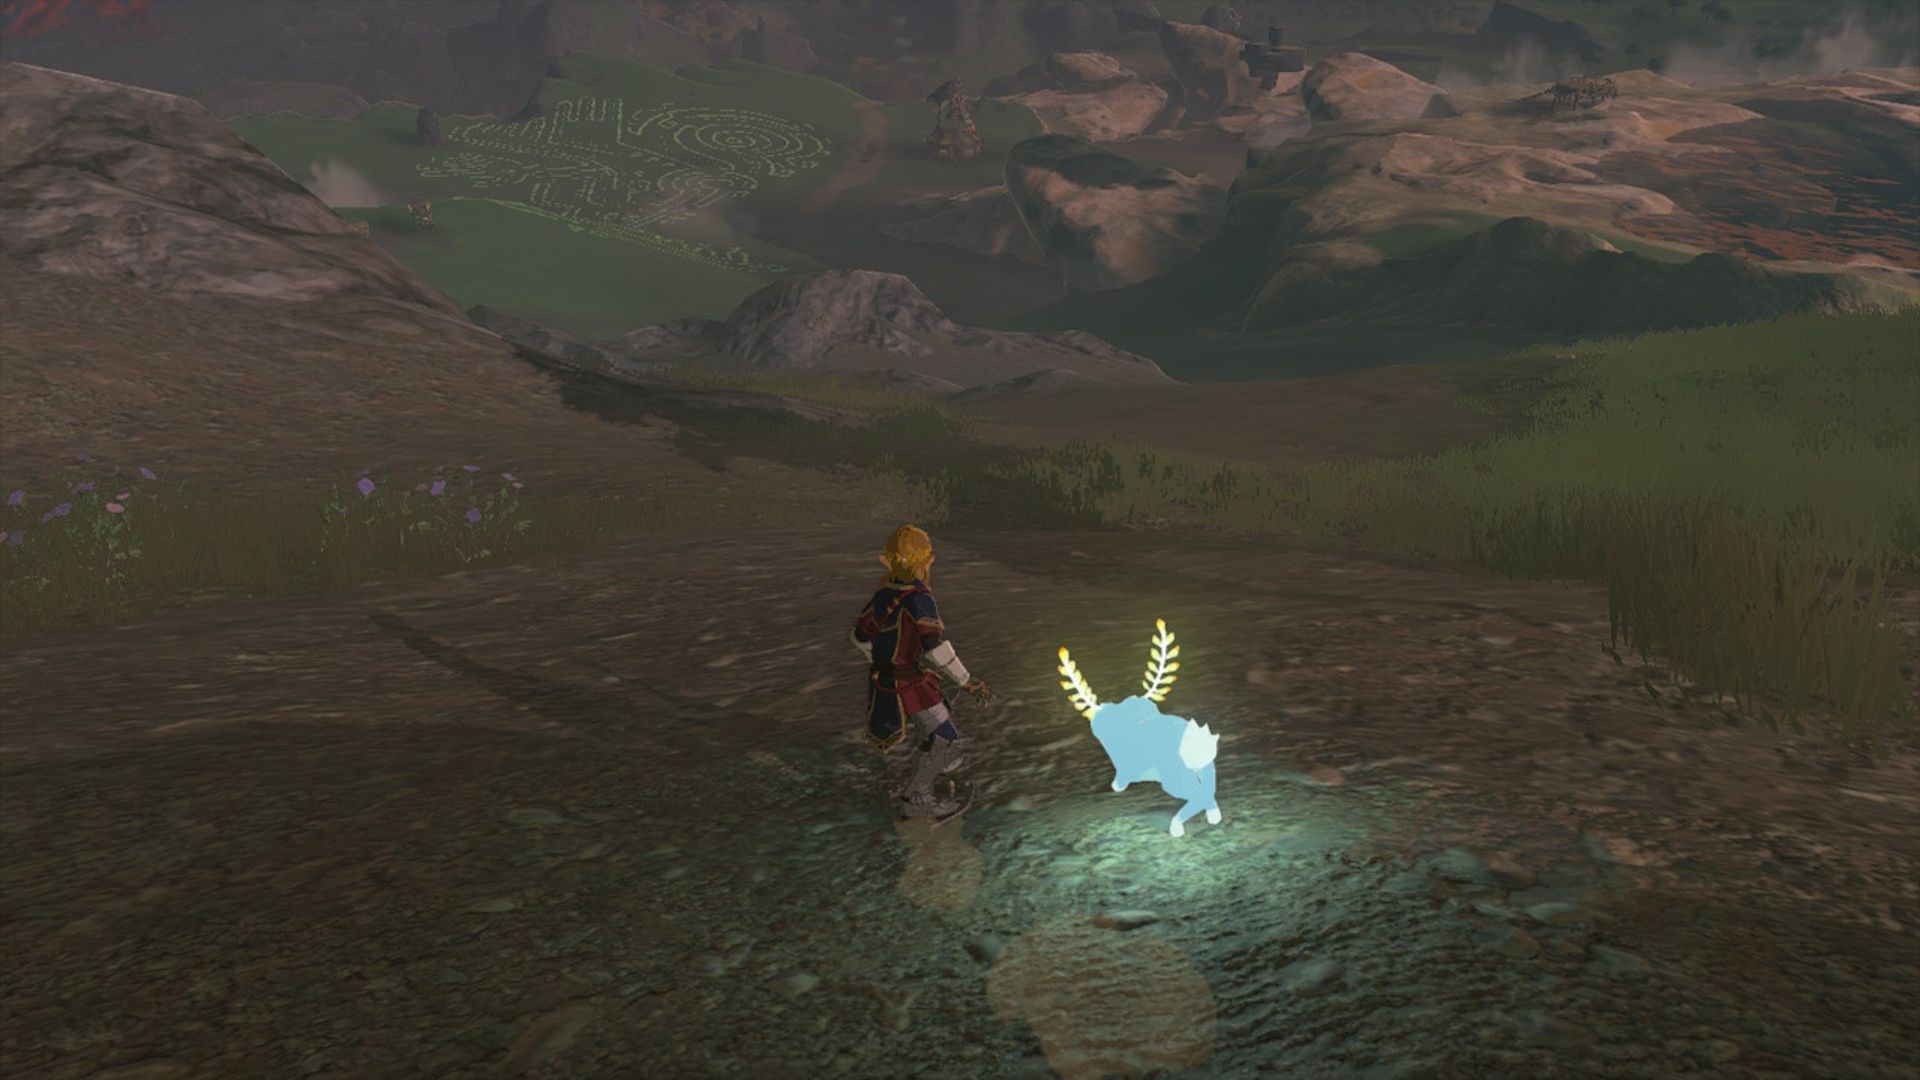 Zelda: Tears of the Kingdom shield surf - Link, a blond boy in old fashioned guards armour surfing on his shield own a grassy hill at night. Next to him is a rabbit-like creature except it looks like it's made out of blue light.